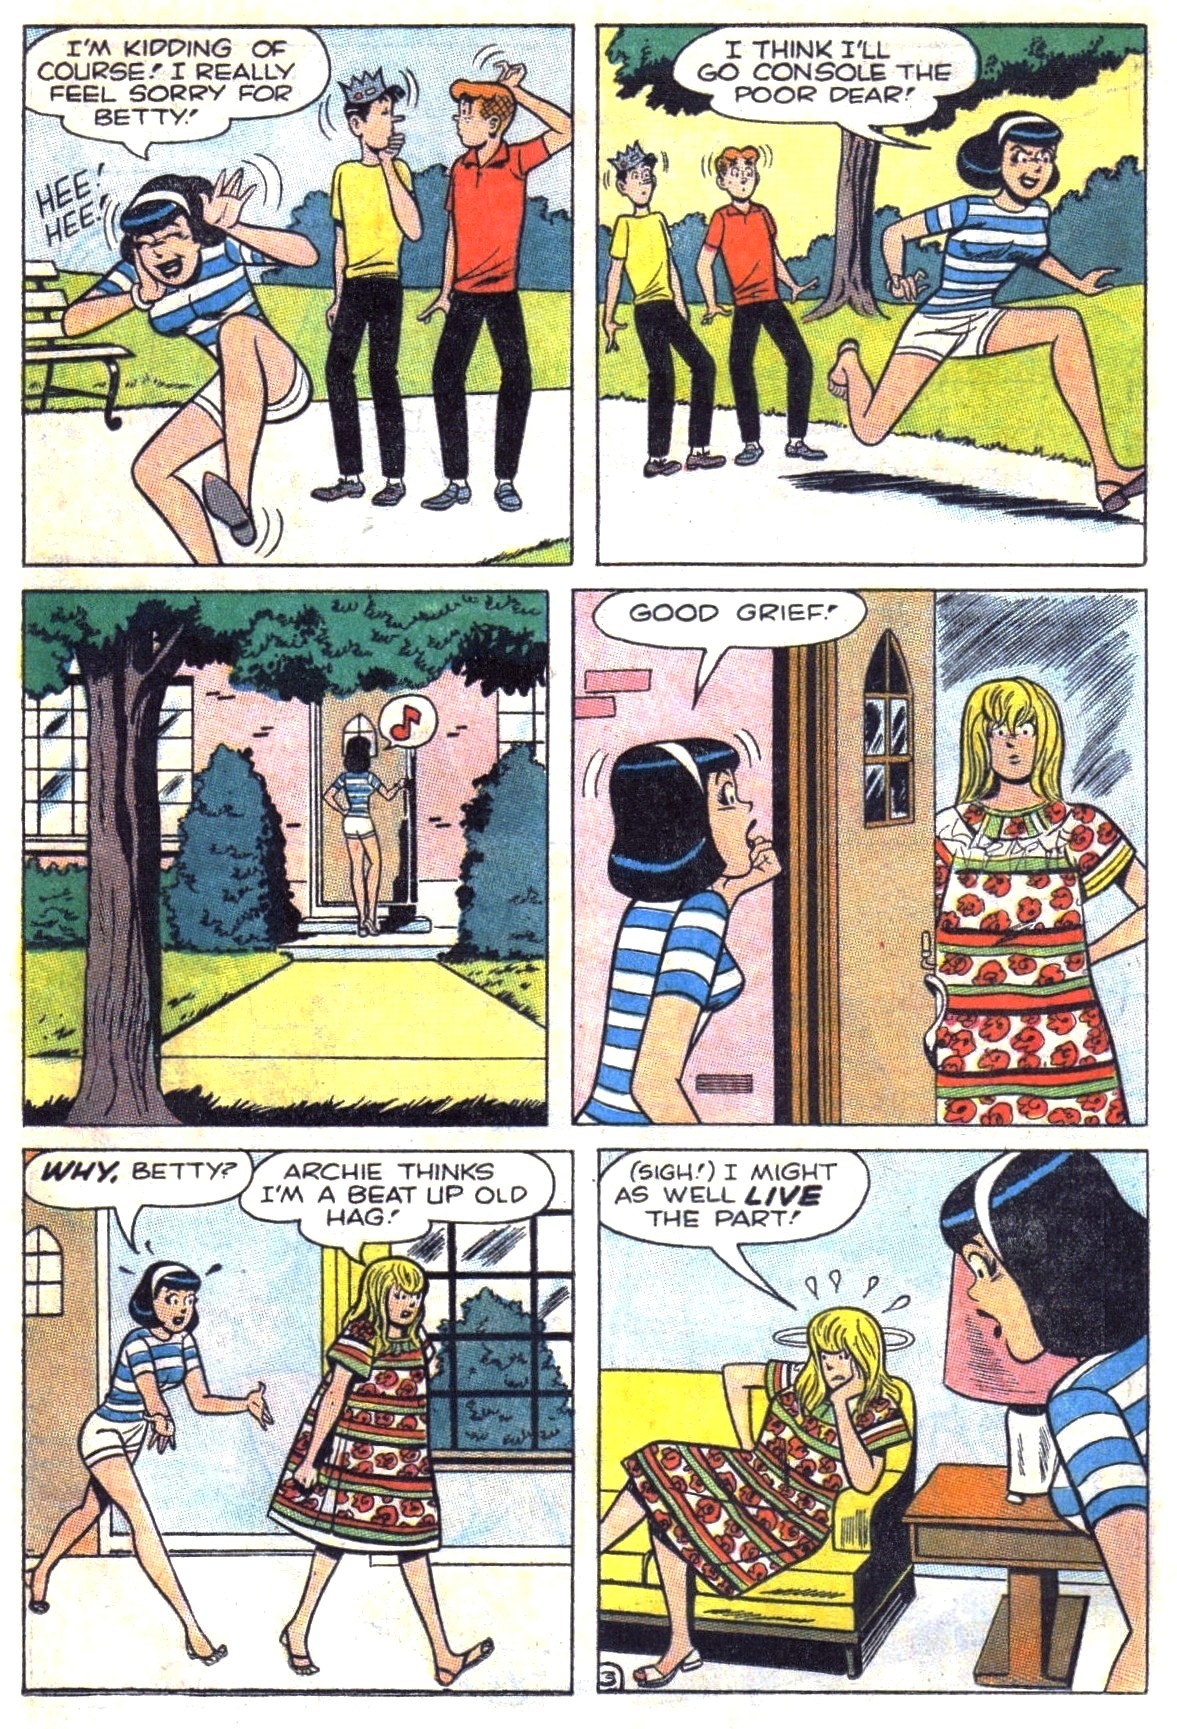 Archie (1960) 159 Page 31